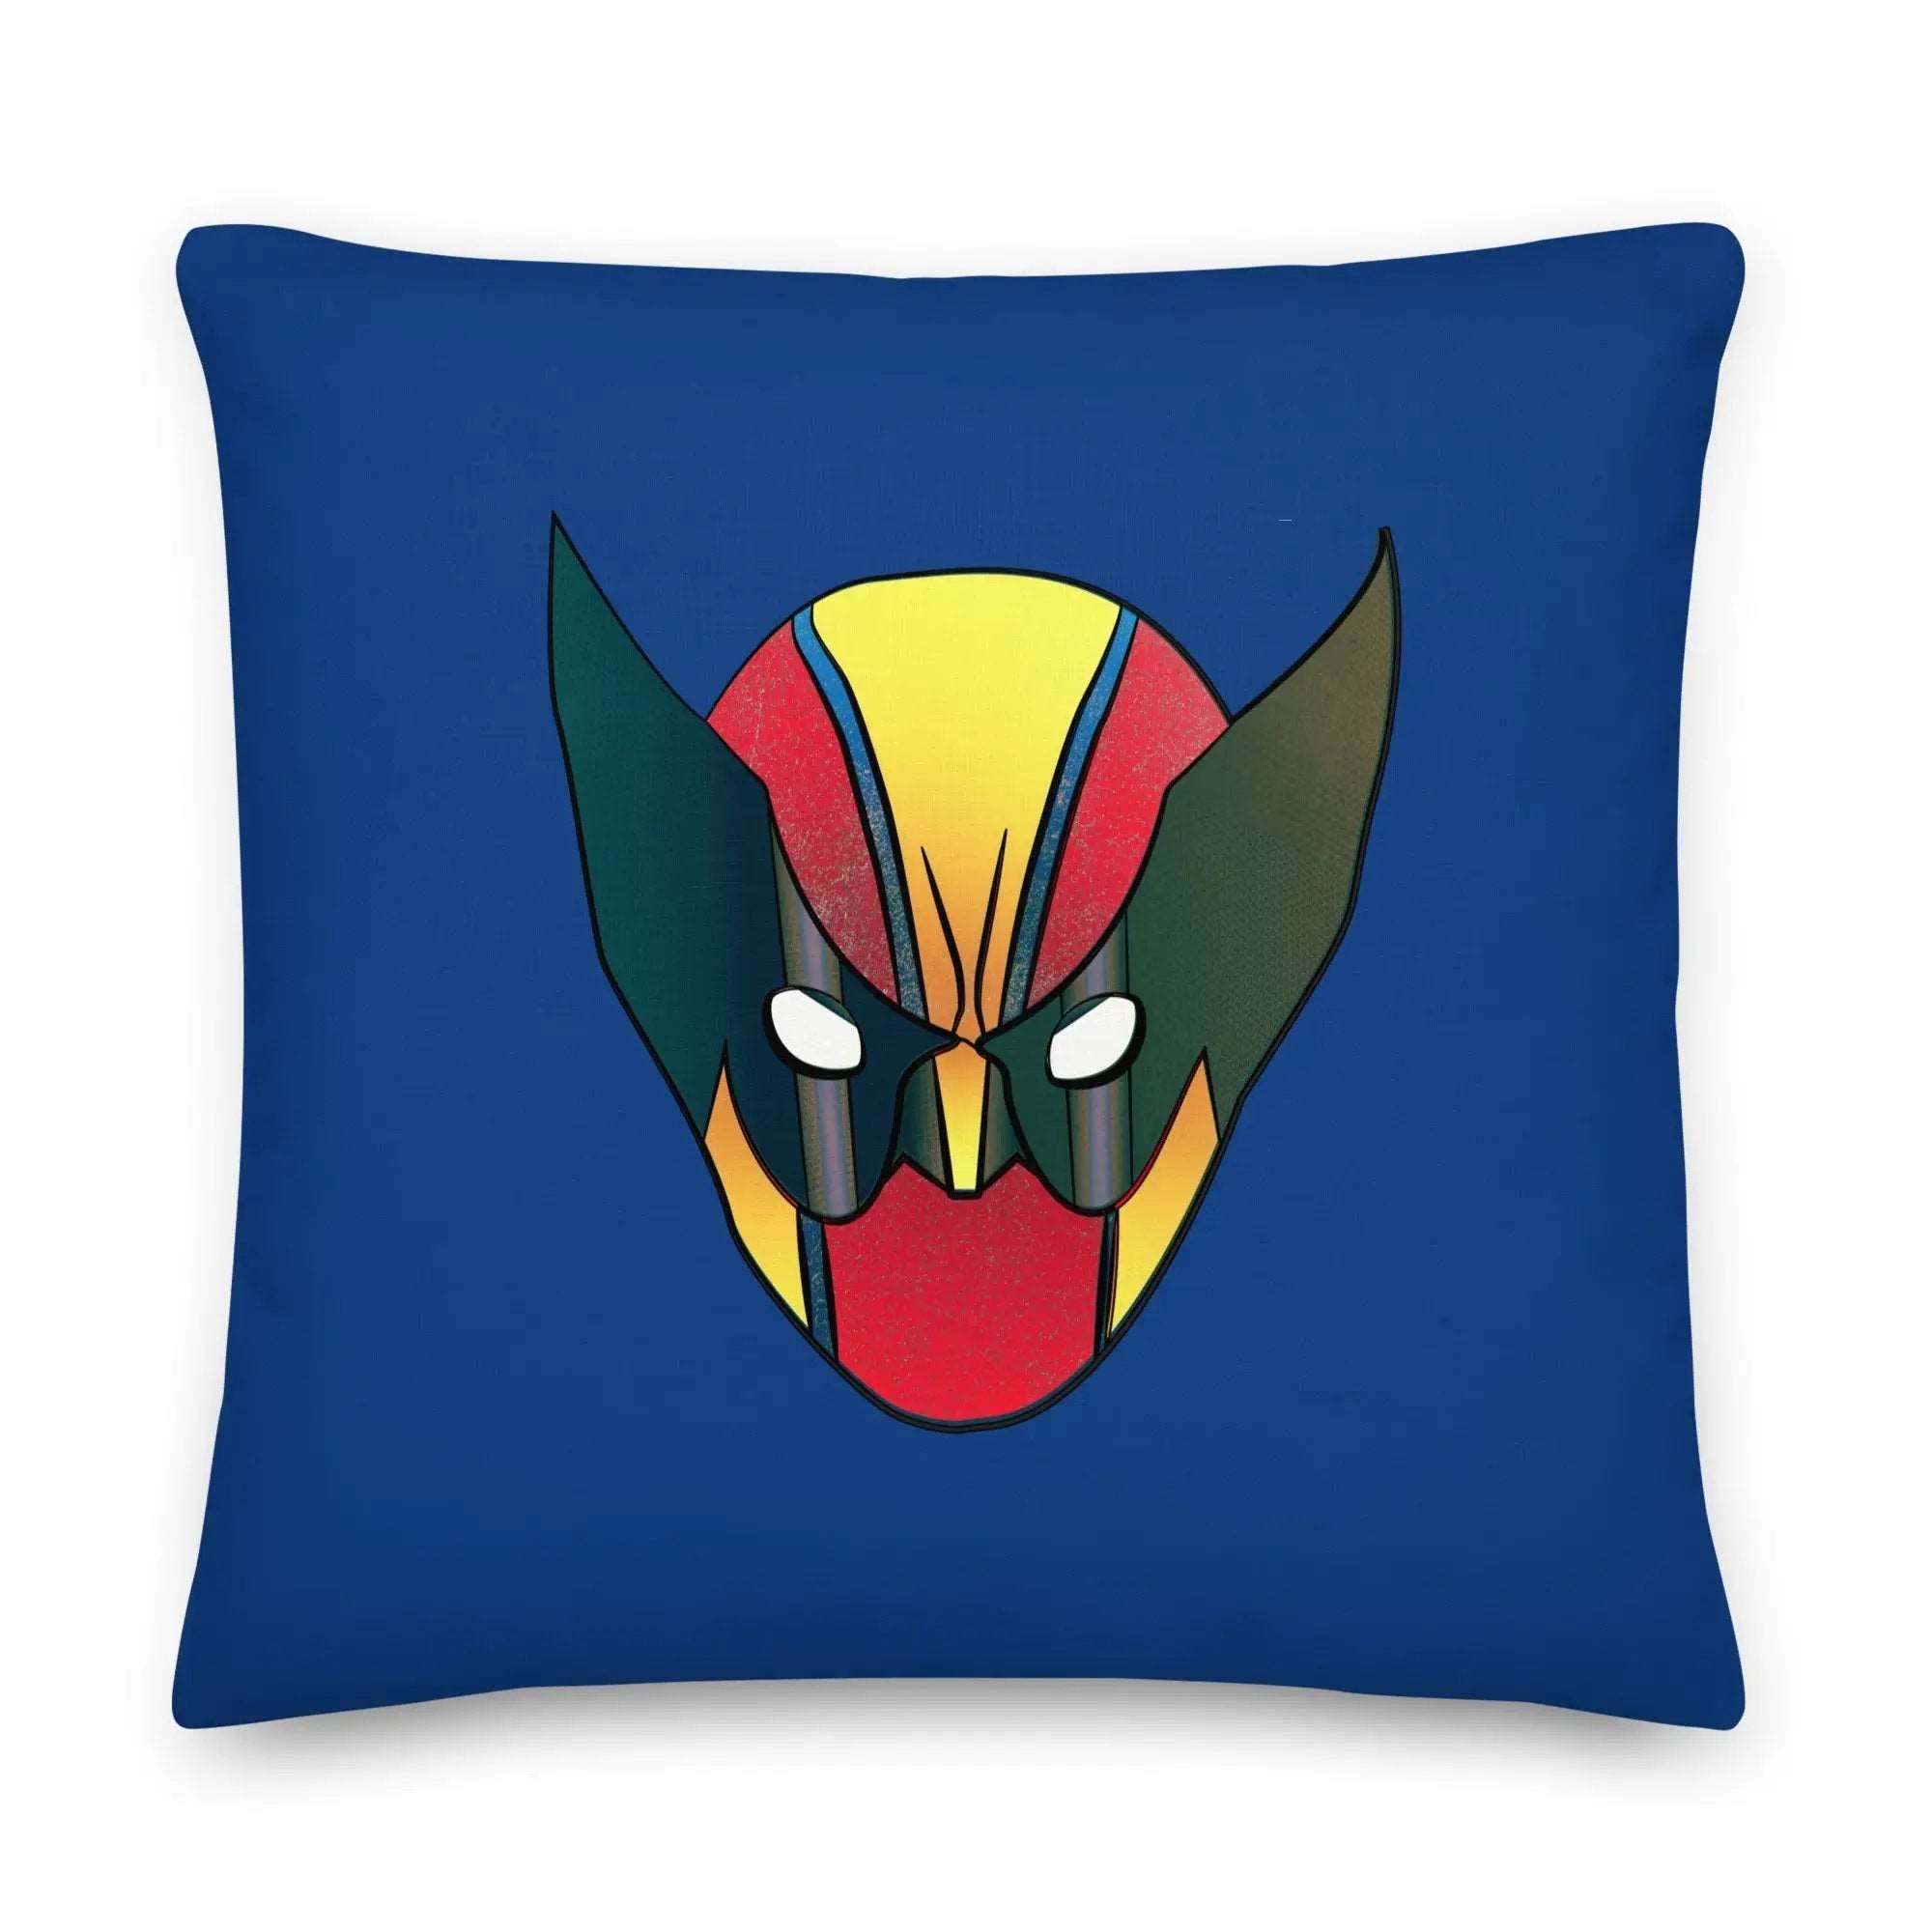 a blue pillow with a red and yellow mask on it